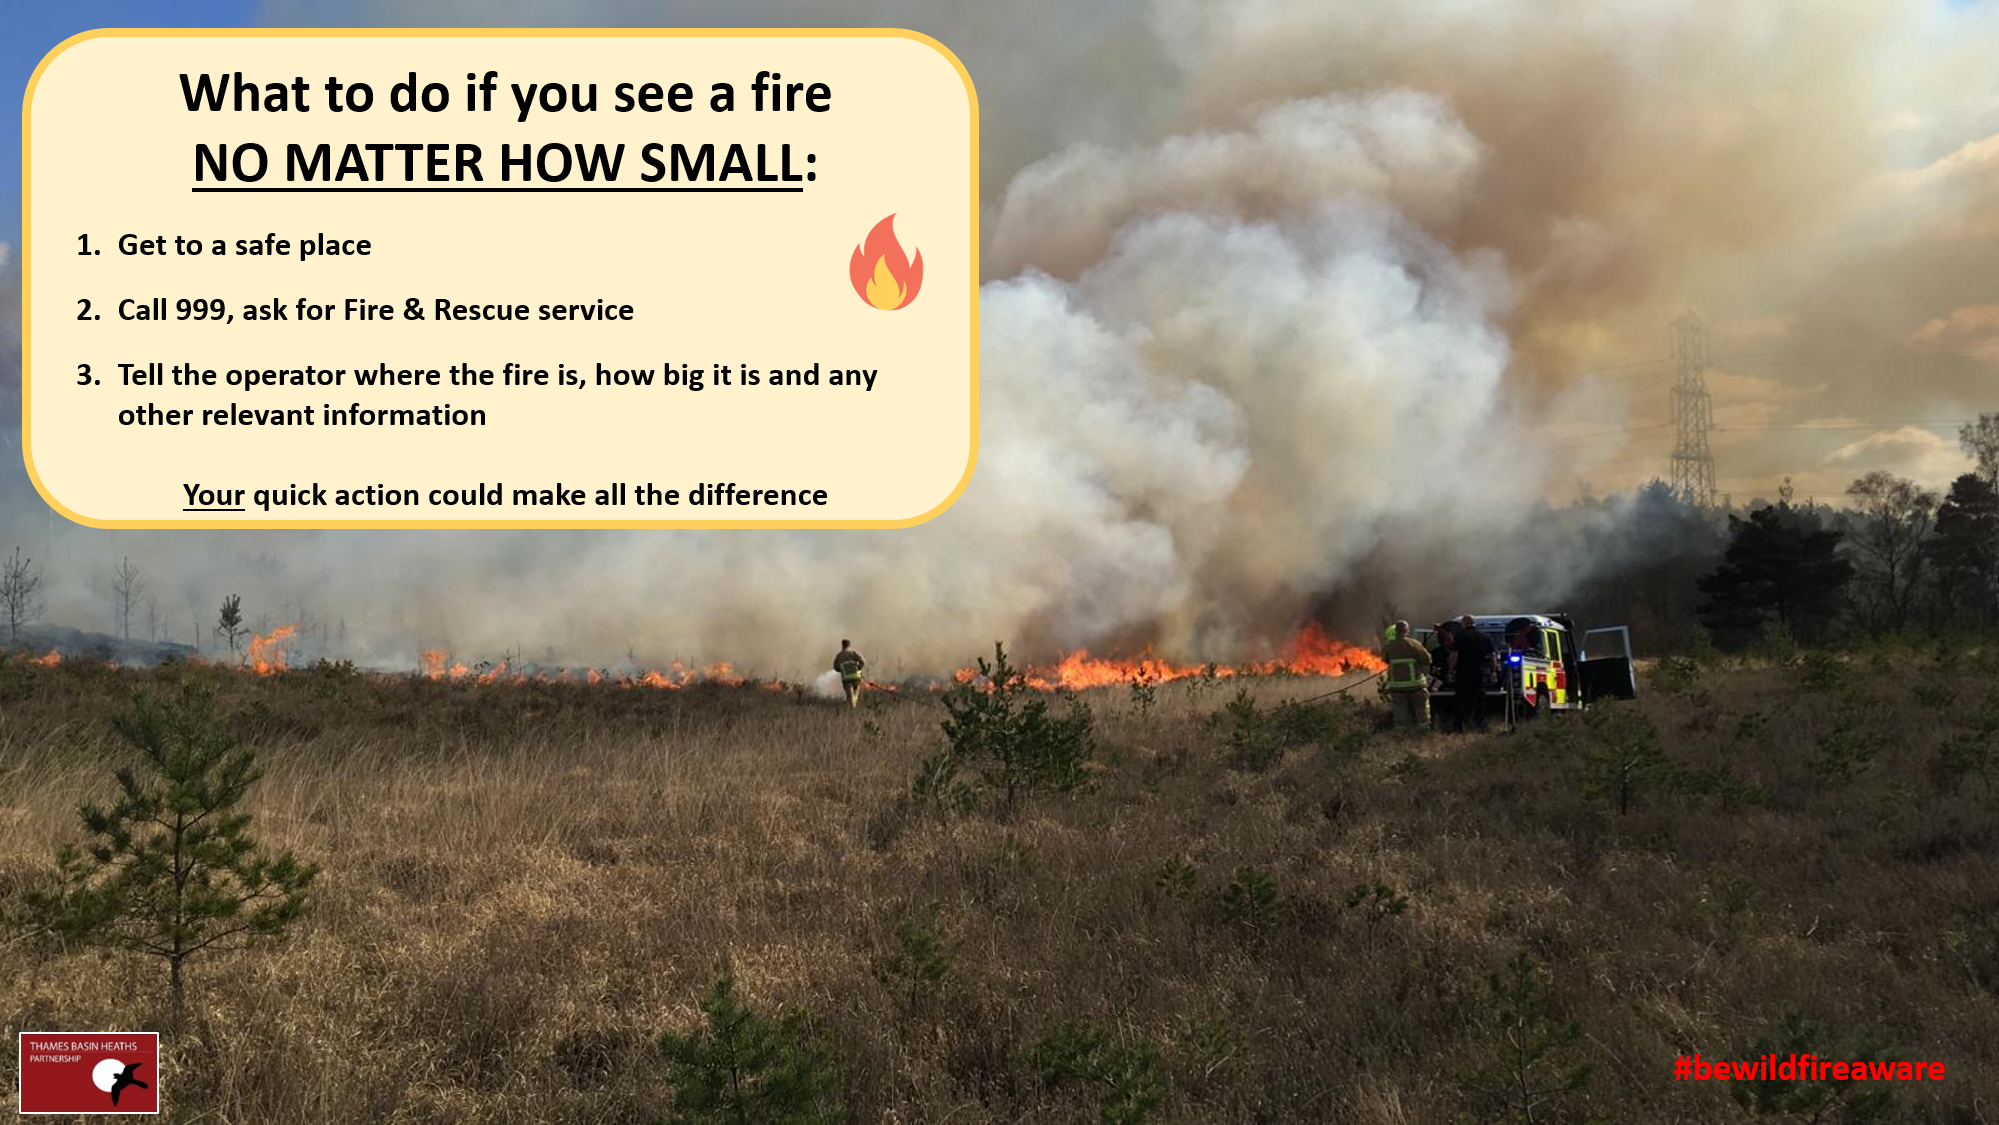 If you discover a wildfire - no matter how small - get to a safe place, ring 999 and provide all the information you can.